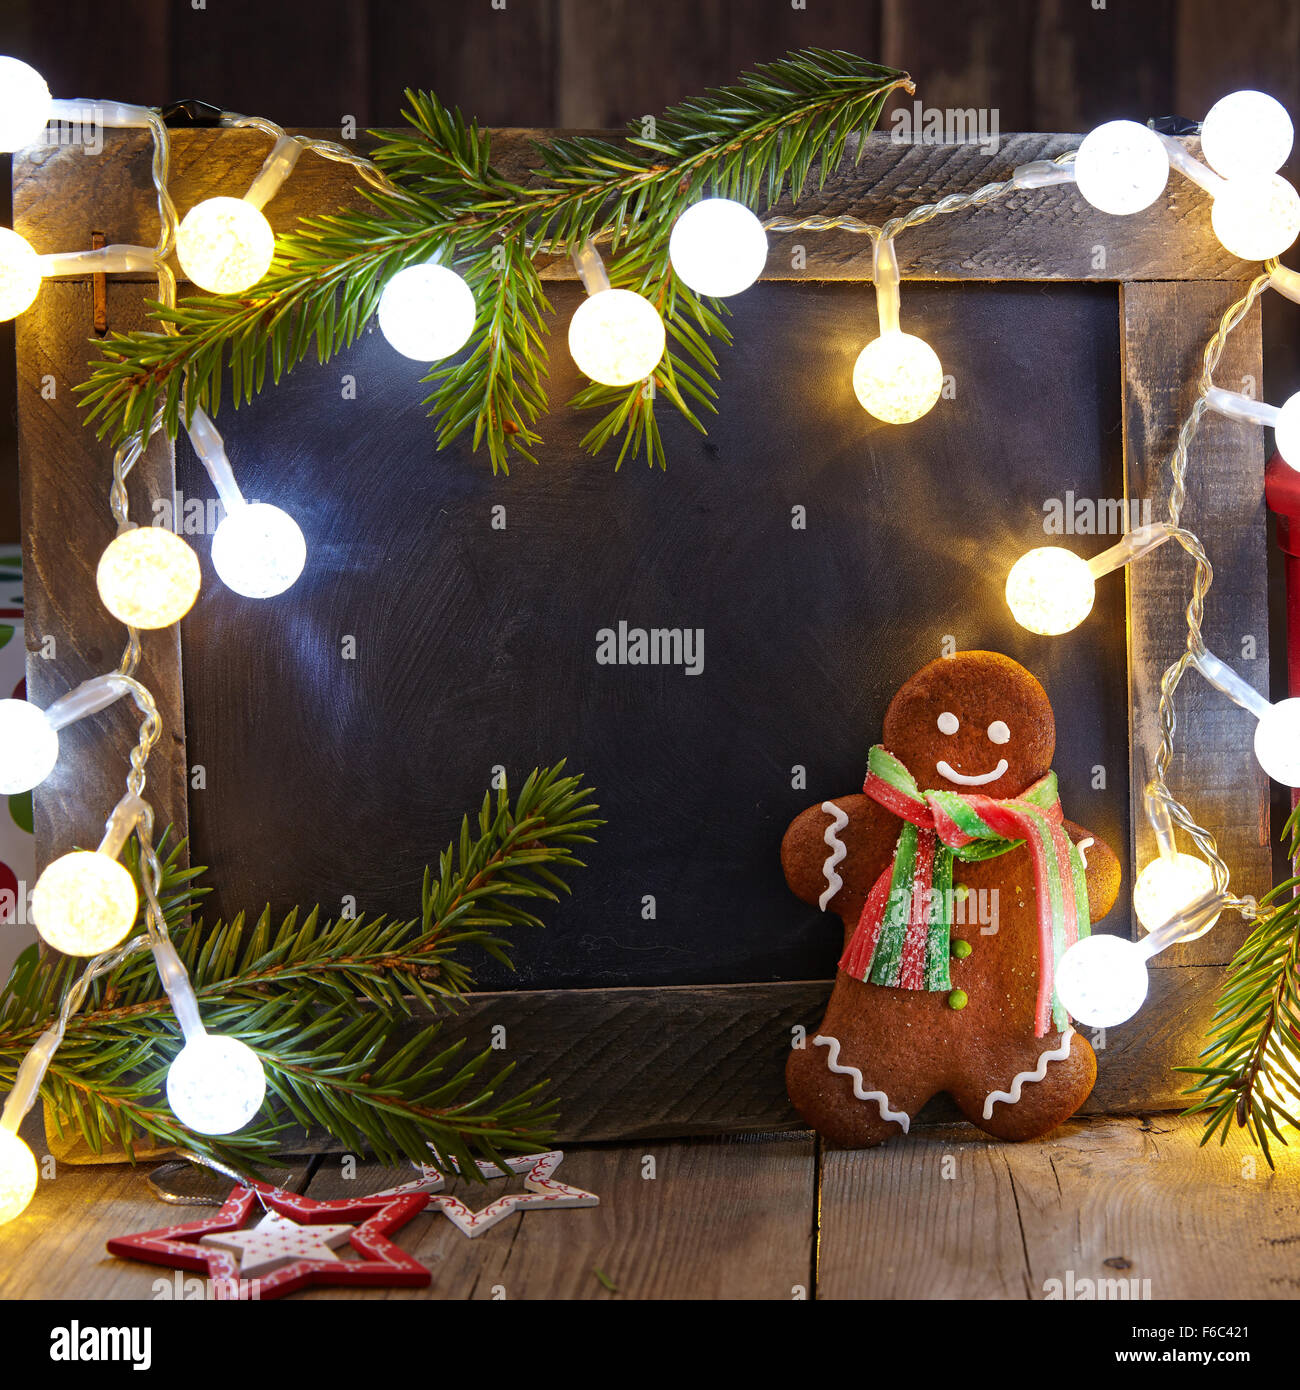 Christmas decoration with chalkboard and gingerbread man Stock Photo